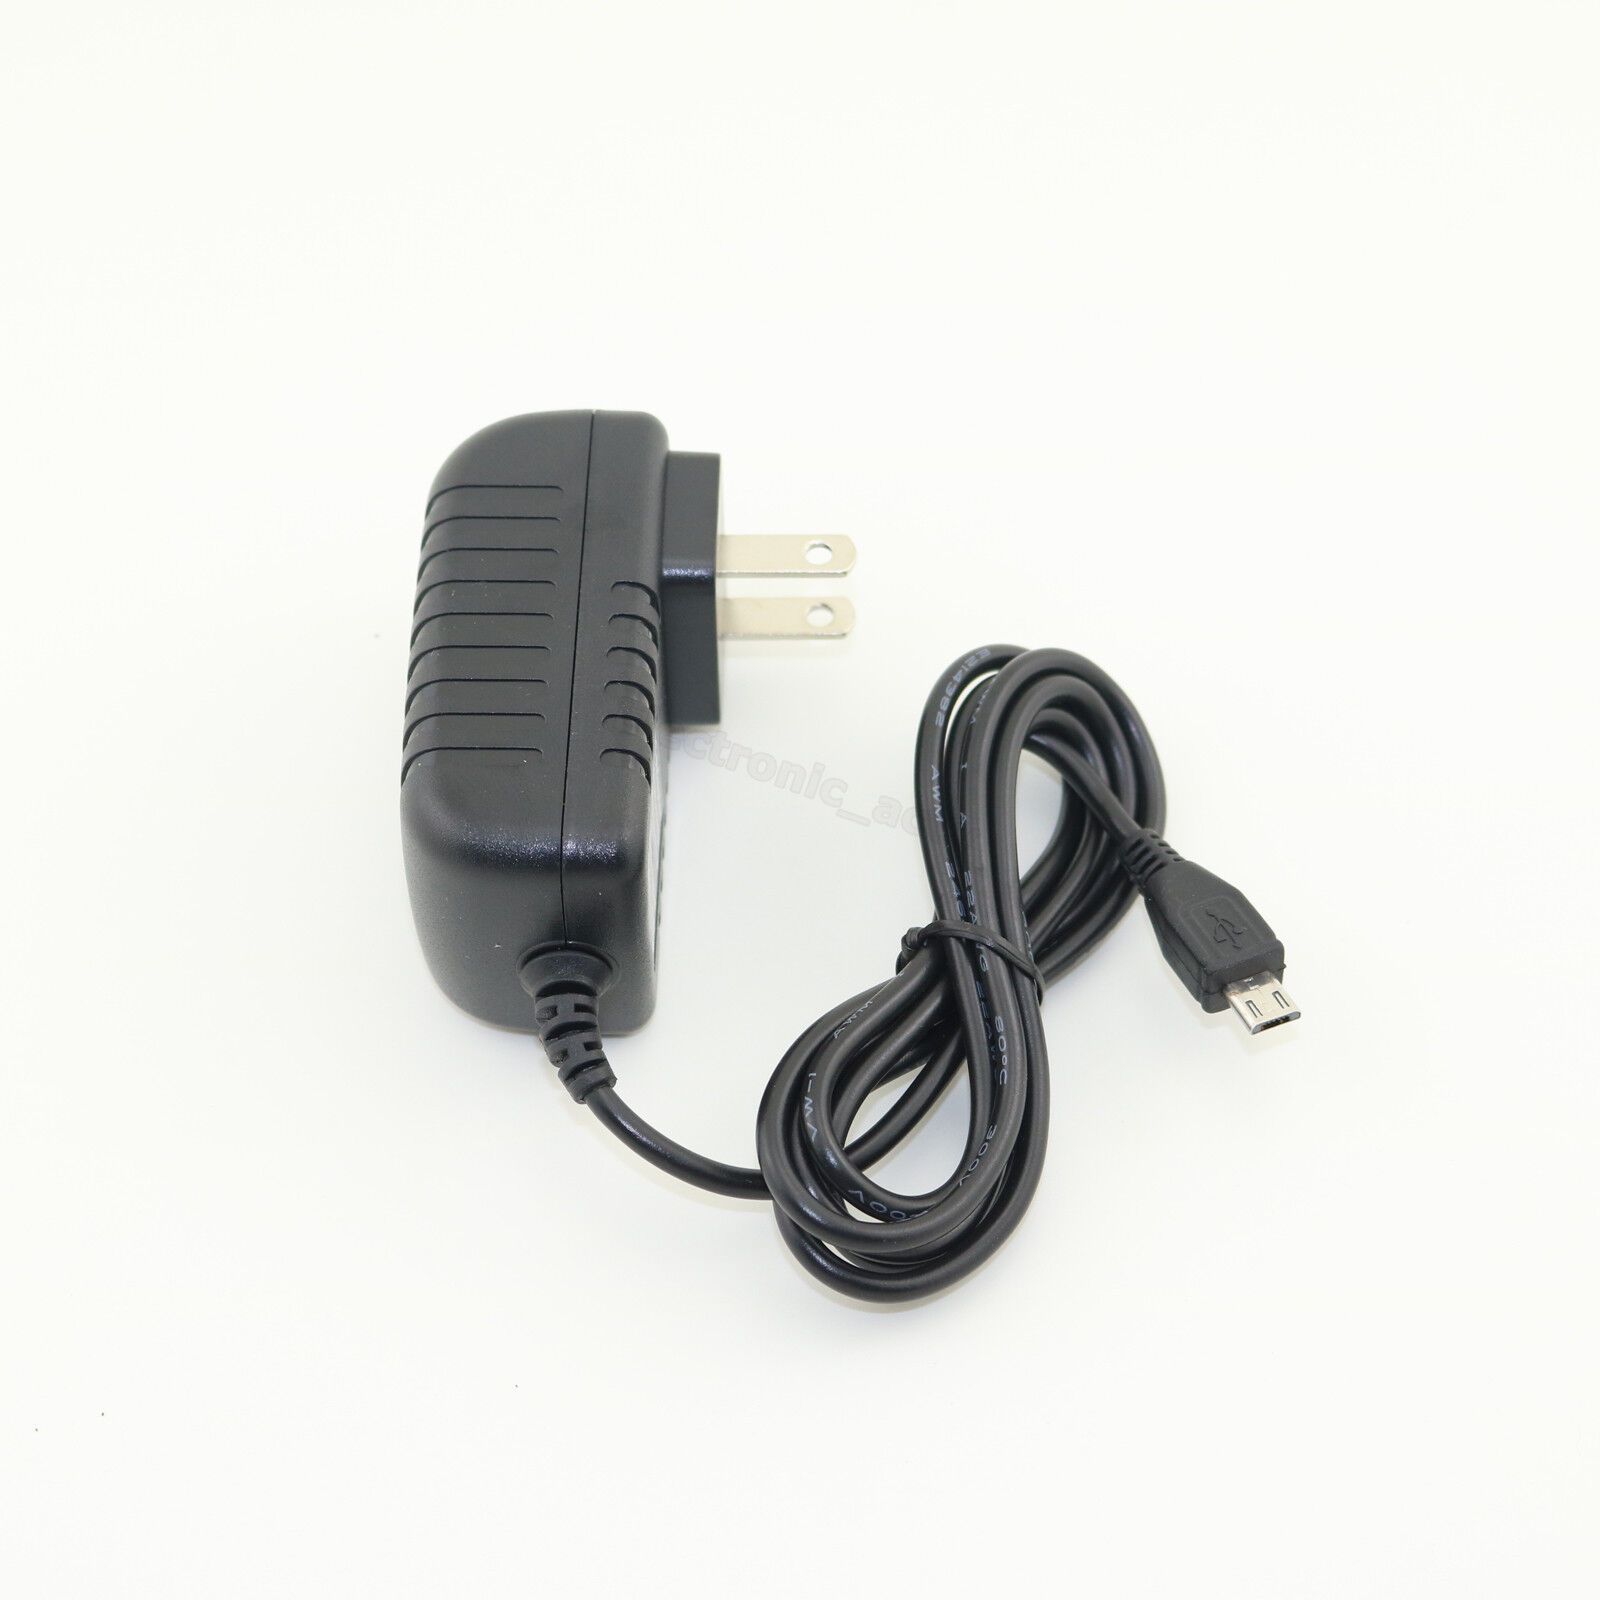 AC Adapter For Verizon FiOS G3100 Home Network Modem/Router Power Supply Charger Country/Region of Manufacture Unite